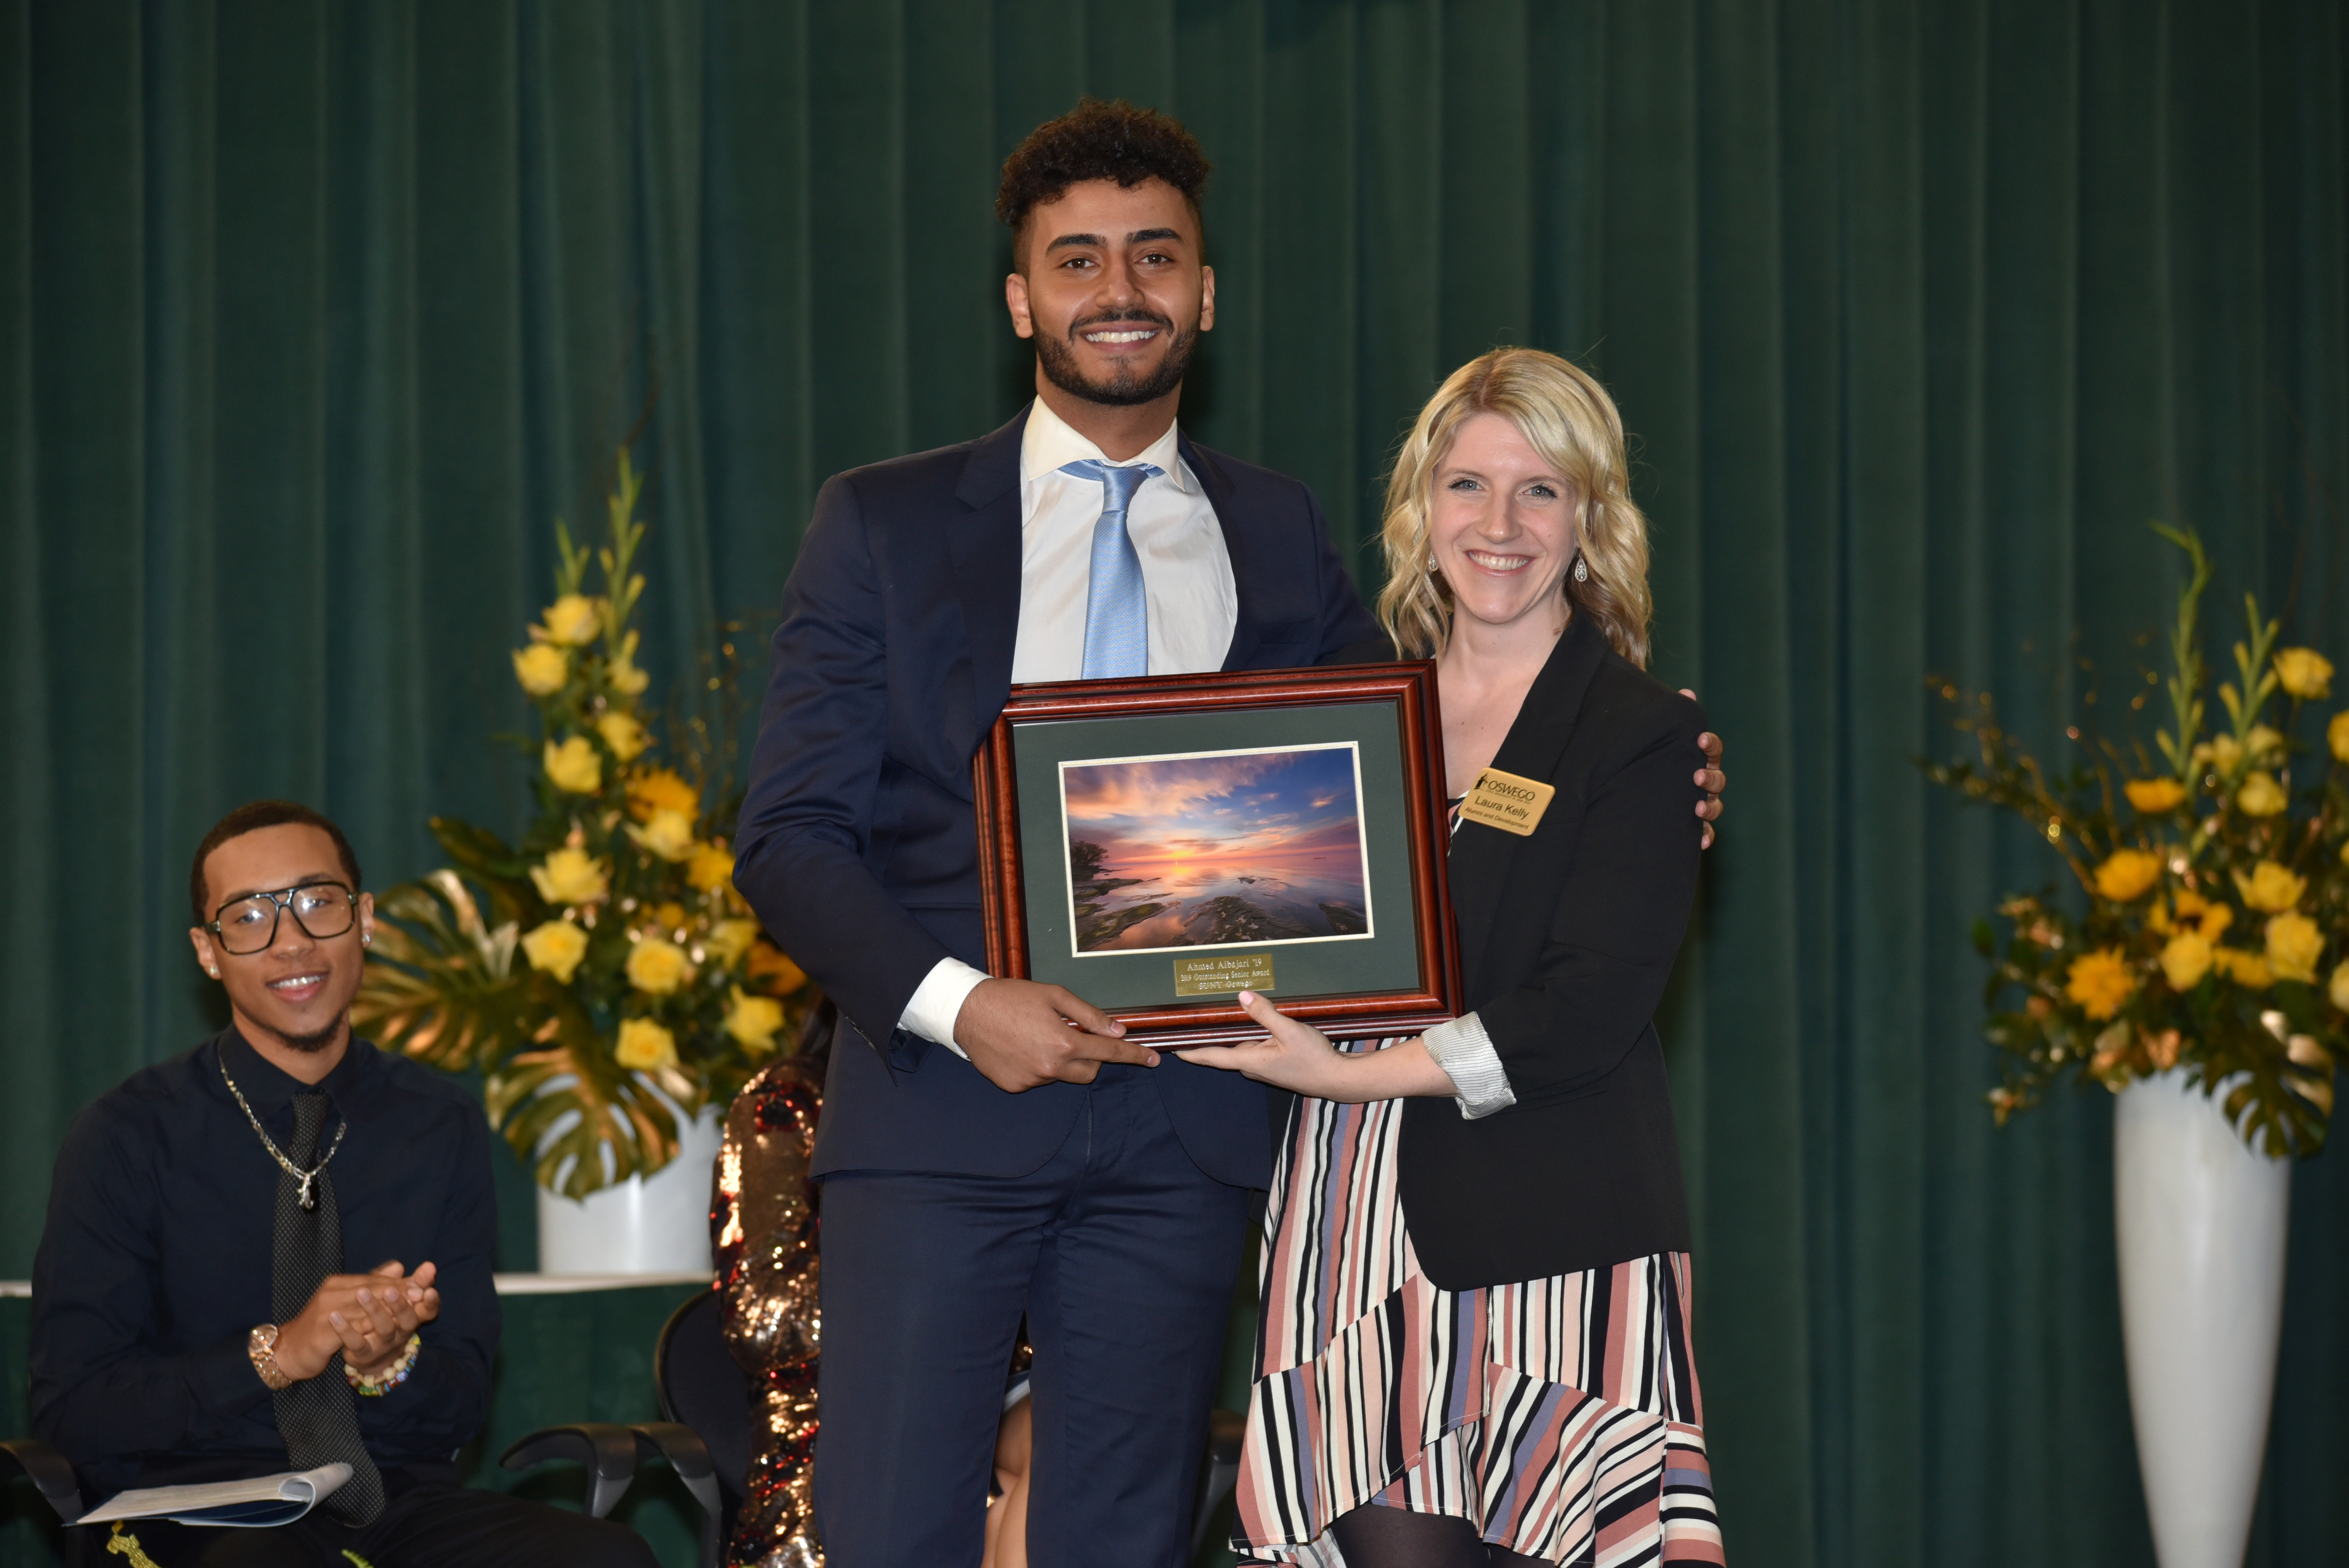 Pictured: Ahmed Albajari at Commencement Eve Dinner and Torchlight Ceremony